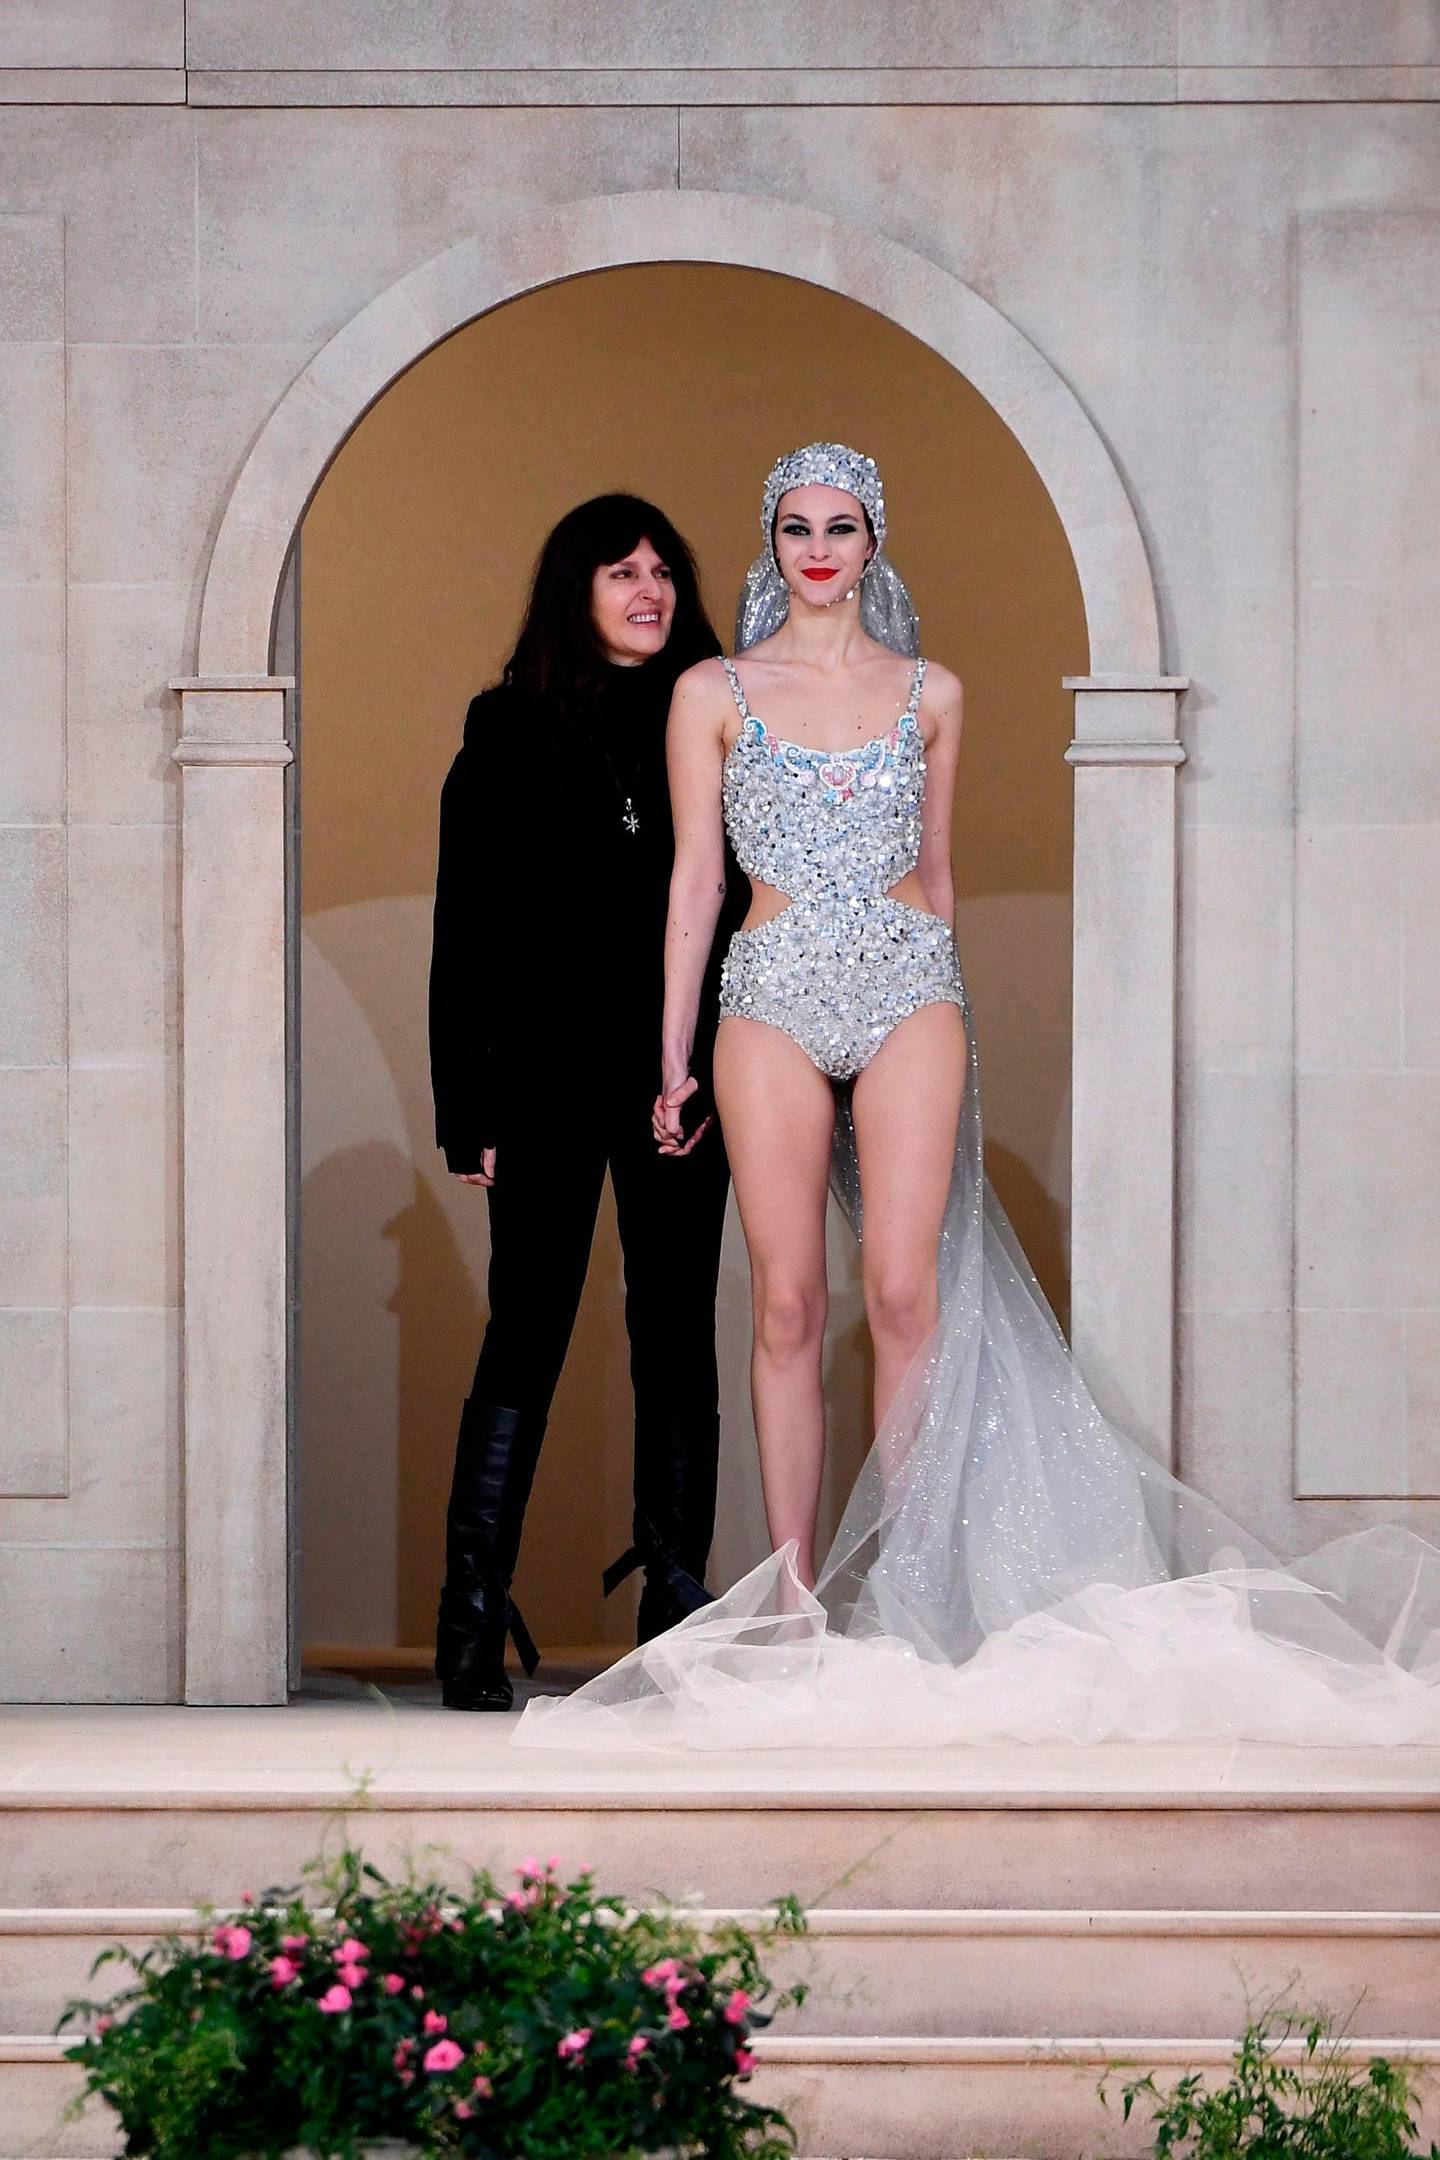 (FILES) In this file photo taken on January 22, 2019 French fashion studio director of Chanel Virginie Viard (L), flanked by Italian model Vittoria Ceretti, acknowledges the audience at the end of the Chanel Spring-Summer 2019 Haute Couture collection fashion show at the Grand Palais in Paris. Virginie Viard, Lagerfeld's right hand person, will be the successor of late German designer Karl Lagerfeld, and will become the fashion designer of Chanel according to a statement of the French fashion house. German fashion designer Karl Lagerfeld has died at the age of 85, it was announced on February 19, 2019.  / AFP / Anne-Christine POUJOULAT            
